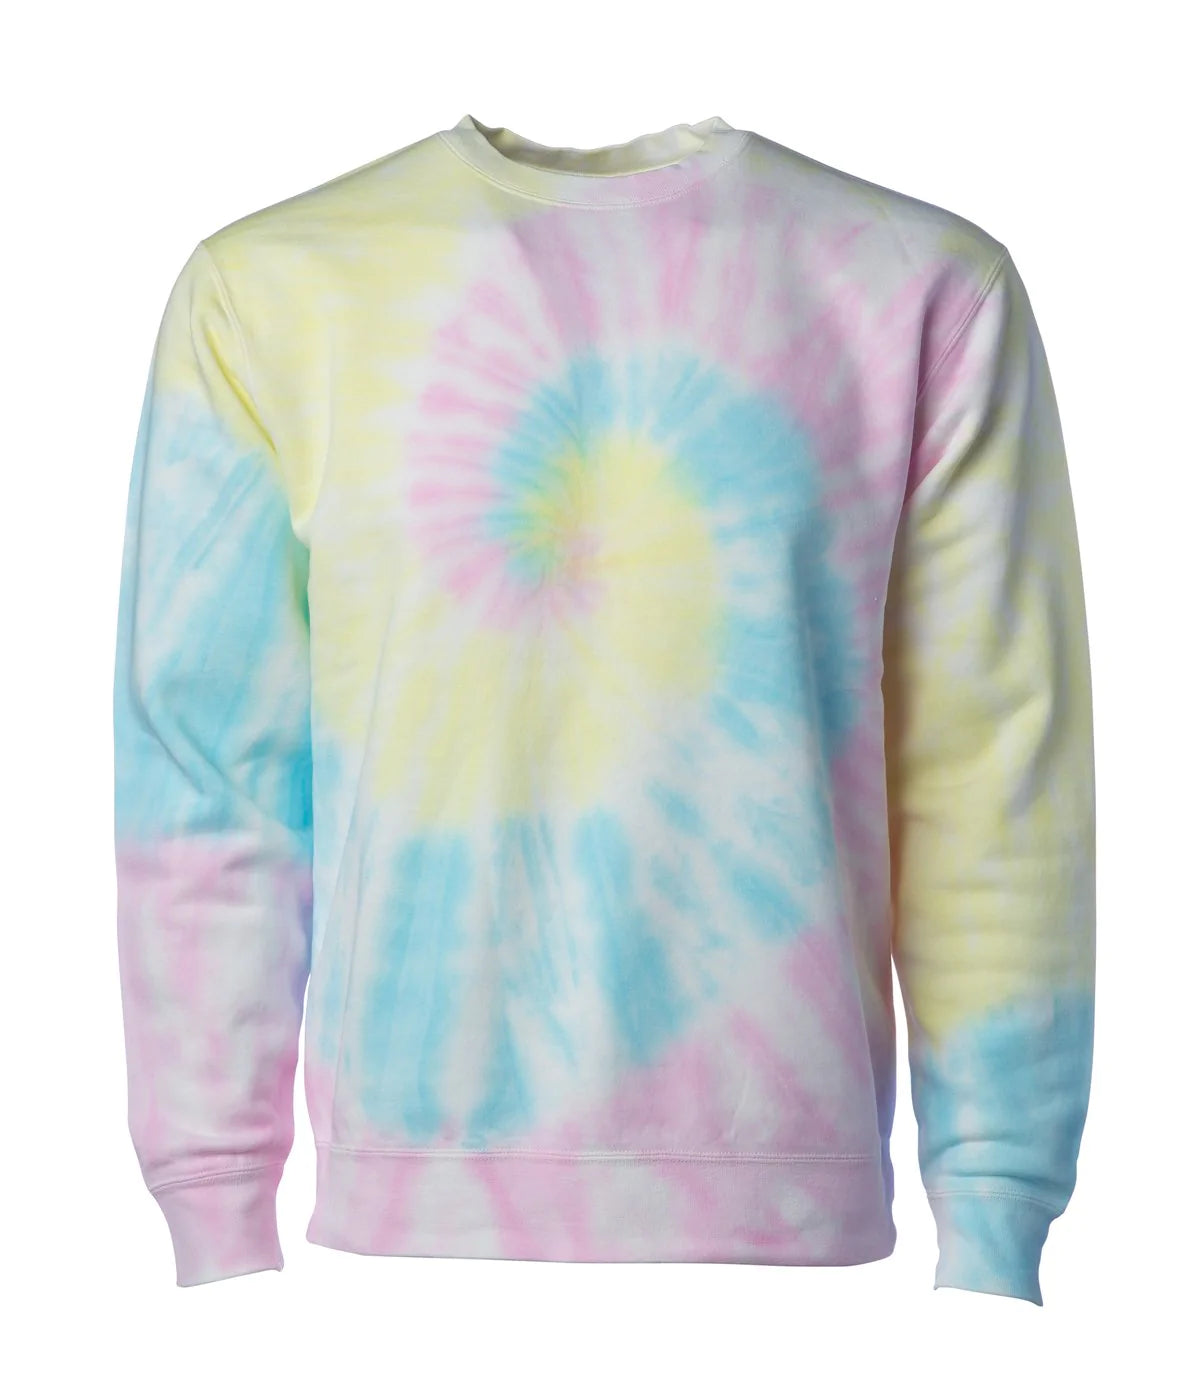 INDEPENDENT TRADING CO. - PRM3500 TIE-DYE